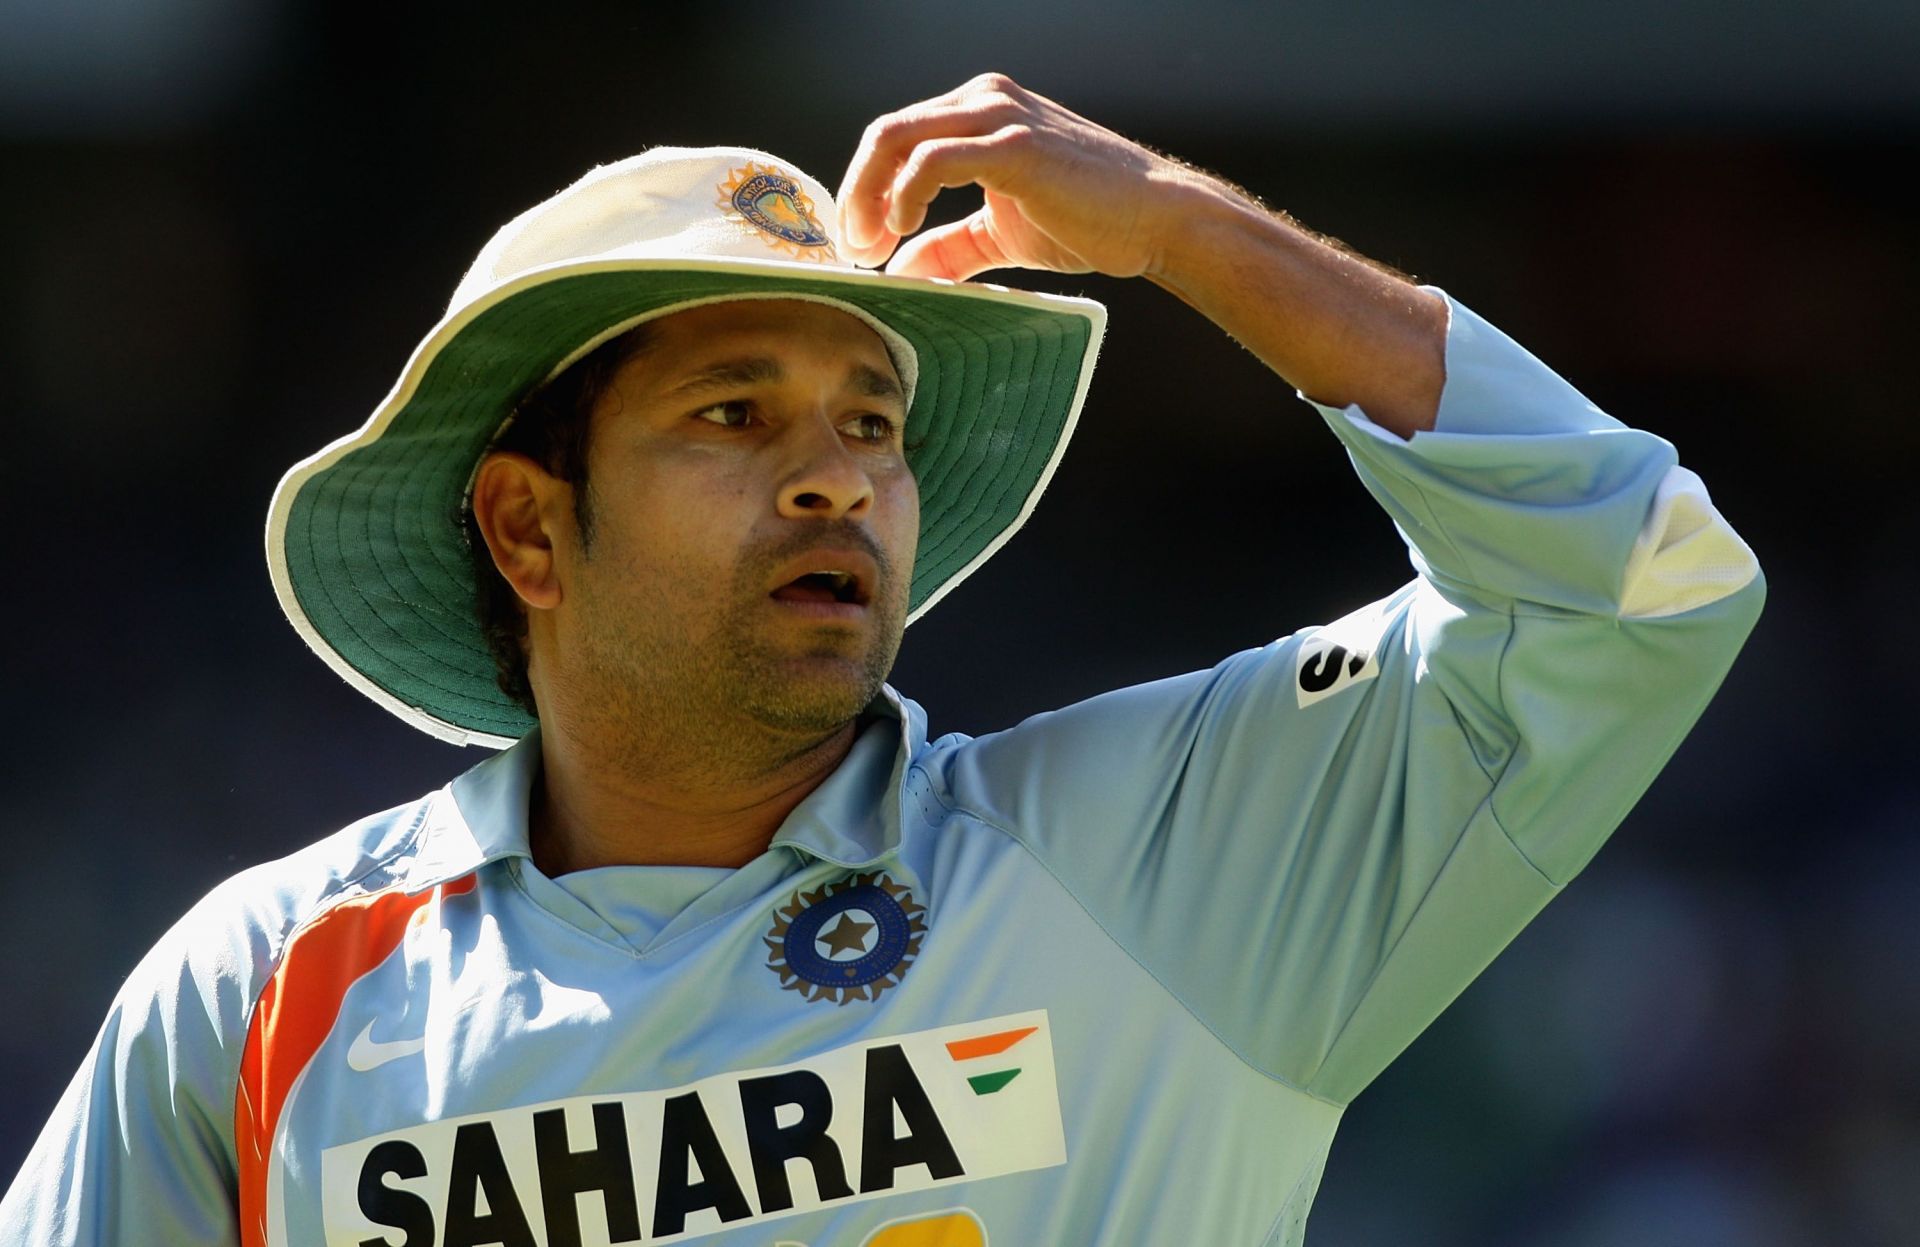 Sachin Tendulkar was once accused of ball-tampering.